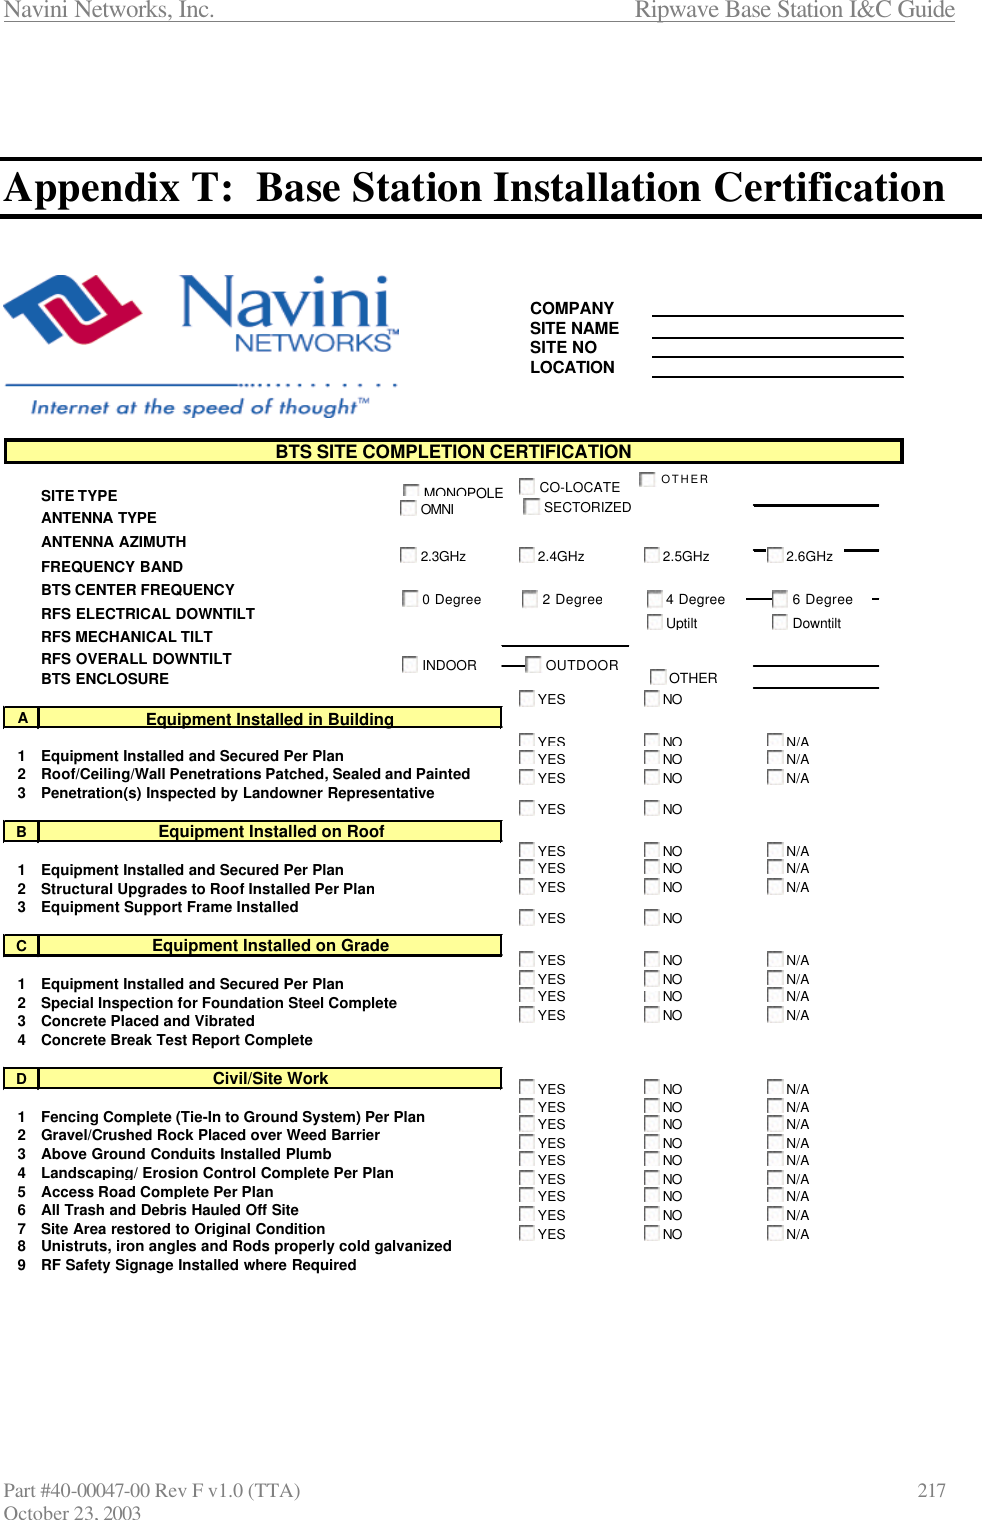 Navini Networks, Inc.                      Ripwave Base Station I&amp;C Guide Part #40-00047-00 Rev F v1.0 (TTA)            217 October 23, 2003    Appendix T:  Base Station Installation Certification     COMPANYSITE NAMESITE NOLOCATIONSITE TYPEANTENNA TYPE  ANTENNA AZIMUTHFREQUENCY BANDBTS CENTER FREQUENCYRFS ELECTRICAL DOWNTILTRFS MECHANICAL TILTRFS OVERALL DOWNTILTBTS ENCLOSUREA1Equipment Installed and Secured Per Plan2Roof/Ceiling/Wall Penetrations Patched, Sealed and Painted3Penetration(s) Inspected by Landowner RepresentativeB1Equipment Installed and Secured Per Plan2Structural Upgrades to Roof Installed Per Plan3Equipment Support Frame InstalledC1Equipment Installed and Secured Per Plan2Special Inspection for Foundation Steel Complete3Concrete Placed and Vibrated4Concrete Break Test Report CompleteD1Fencing Complete (Tie-In to Ground System) Per Plan2Gravel/Crushed Rock Placed over Weed Barrier3Above Ground Conduits Installed Plumb4Landscaping/ Erosion Control Complete Per Plan5Access Road Complete Per Plan6All Trash and Debris Hauled Off Site7Site Area restored to Original Condition8Unistruts, iron angles and Rods properly cold galvanized9RF Safety Signage Installed where Required BTS SITE COMPLETION CERTIFICATIONEquipment Installed in BuildingEquipment Installed on RoofEquipment Installed on GradeCivil/Site WorkYESNON/AYESNON/AYESNON/AYESNOYESNON/AYESNON/AYESNON/AYESNOYESNON/AYESNON/AYESN/AYESNON/AYESNONON/AYESNON/AYESNON/AYESNON/AYESNON/AYESNON/AYESNON/AYESNON/AYESNON/AYESNOMONOPOLECO-LOCATEOMNISECTORIZEDINDOOROUTDOOROTHEROTHER2.4GHz2.3GHz2.5GHz2.6GHz0 Degree2 Degree4 Degree6 DegreeUptiltDowntilt